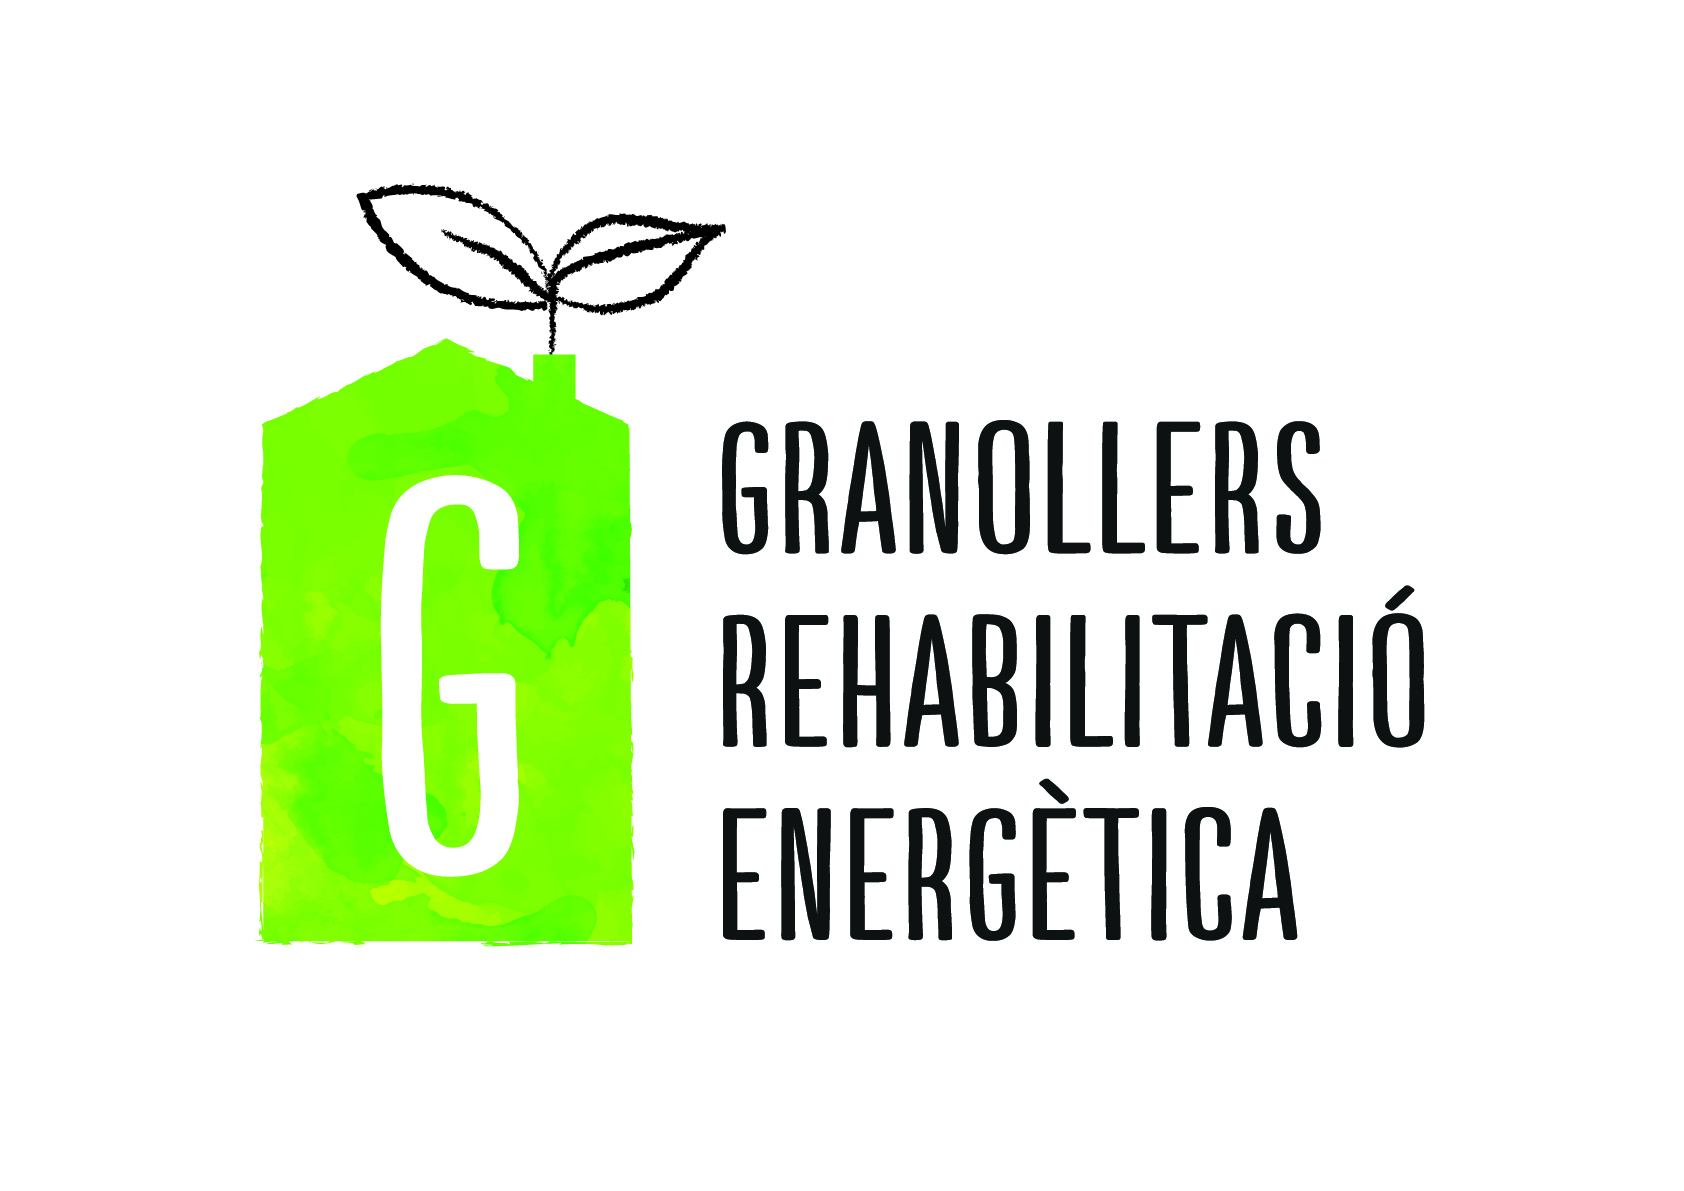 Design of the Granollers Energy Rehabilitation Office